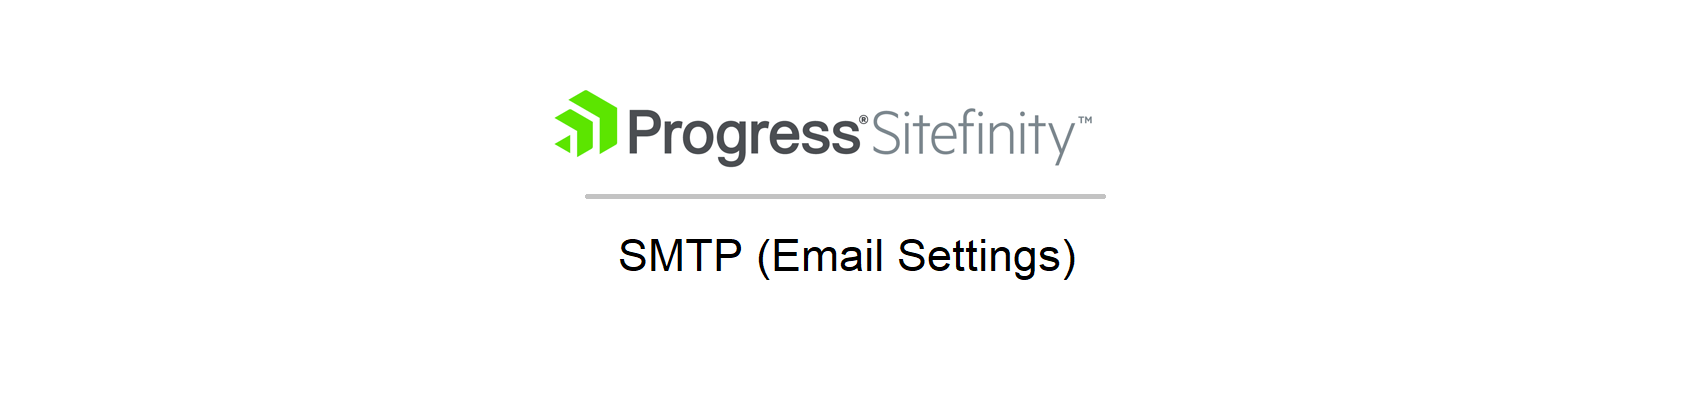 SMTP Email Settings